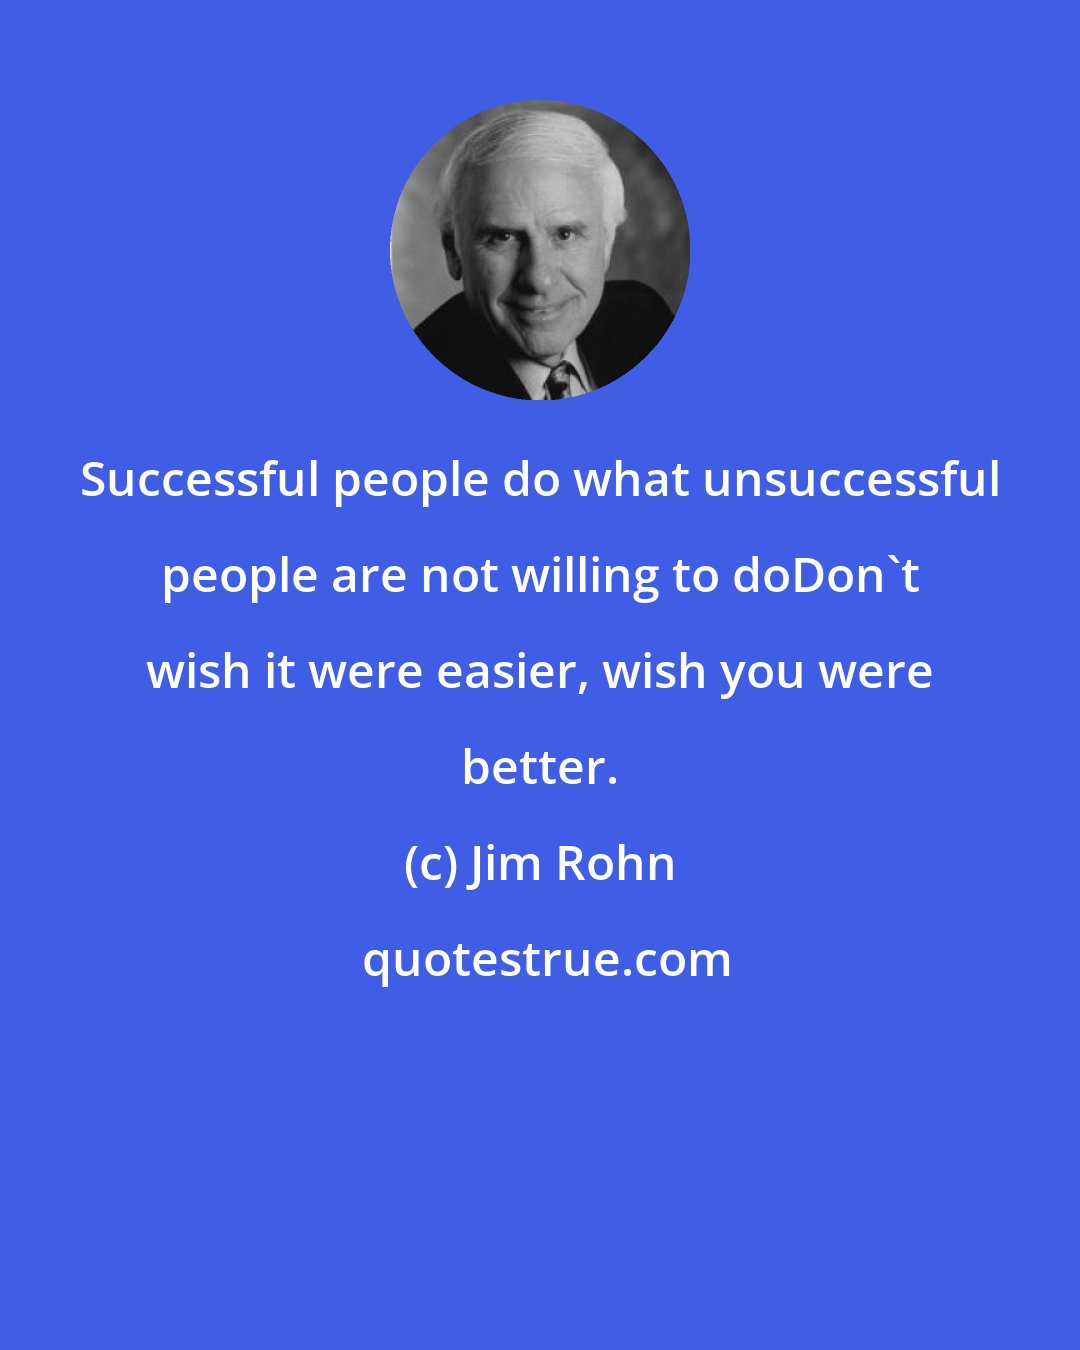 Jim Rohn: Successful people do what unsuccessful people are not willing to doDon't wish it were easier, wish you were better.